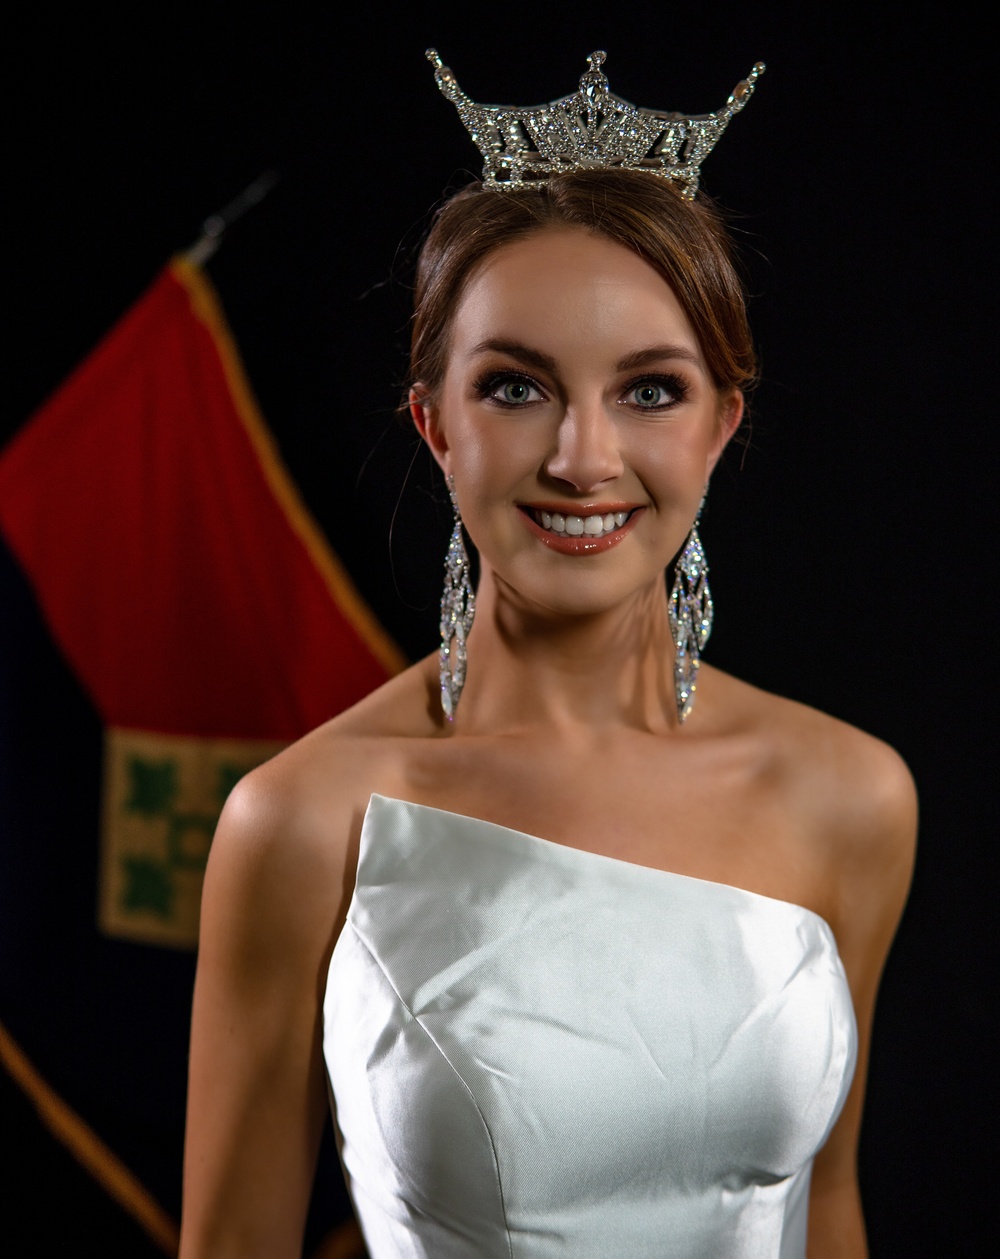 Active Duty Soldier Competes for Miss America